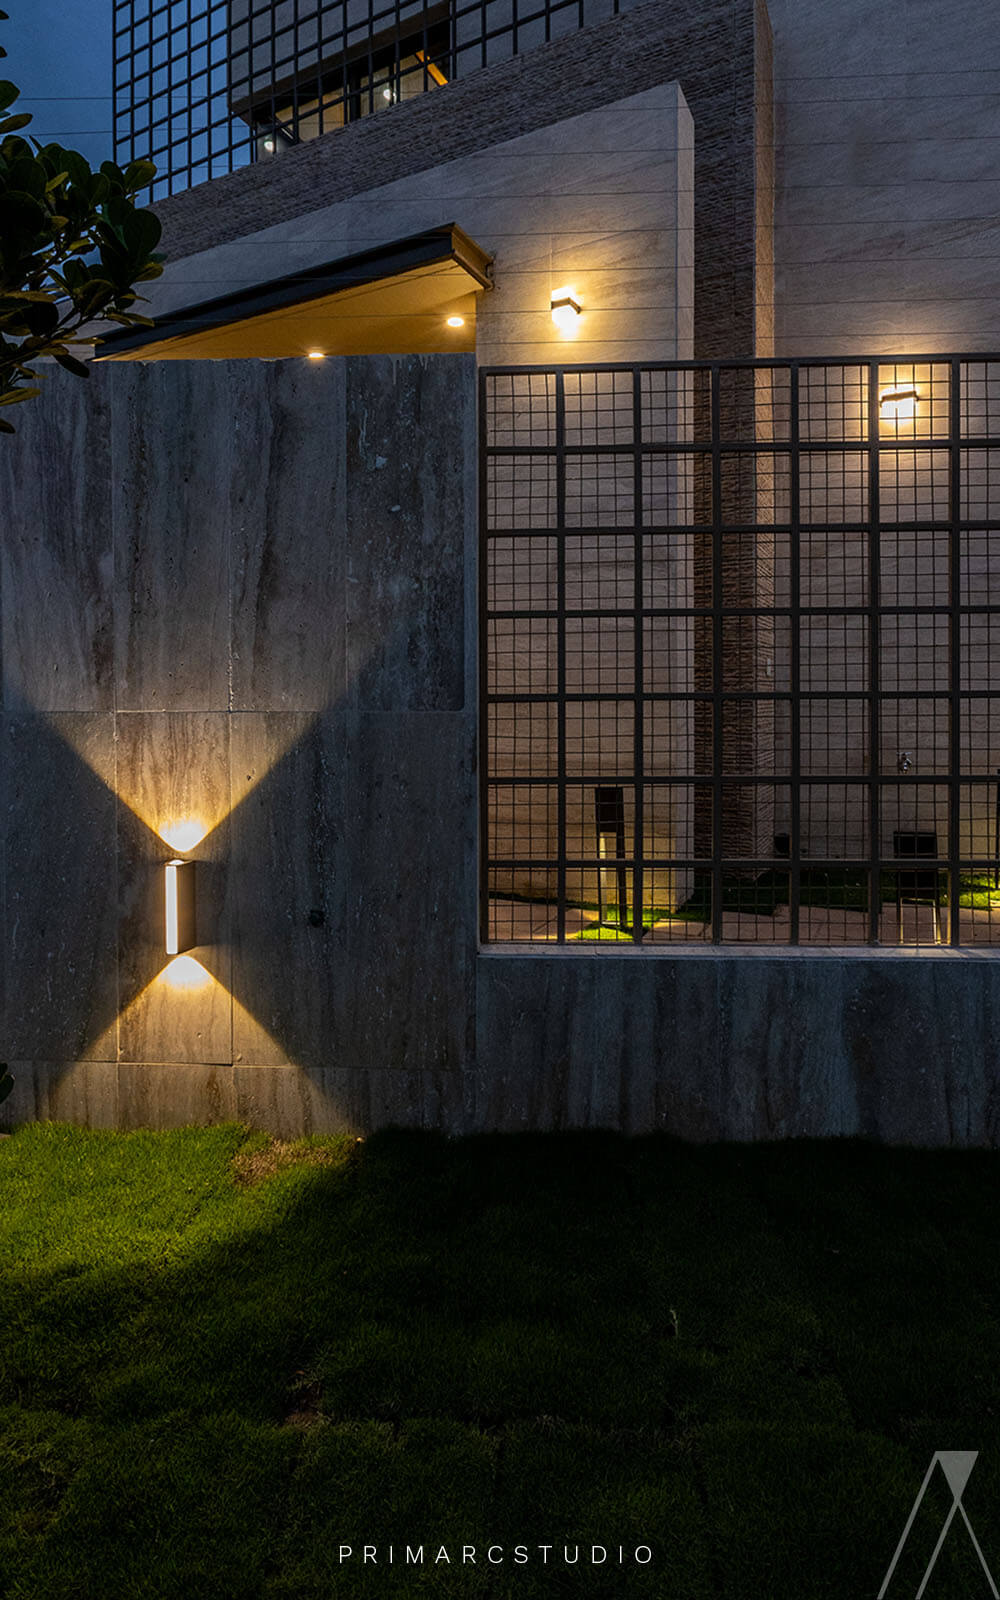 Boundary wall design with exterior lighting on house.